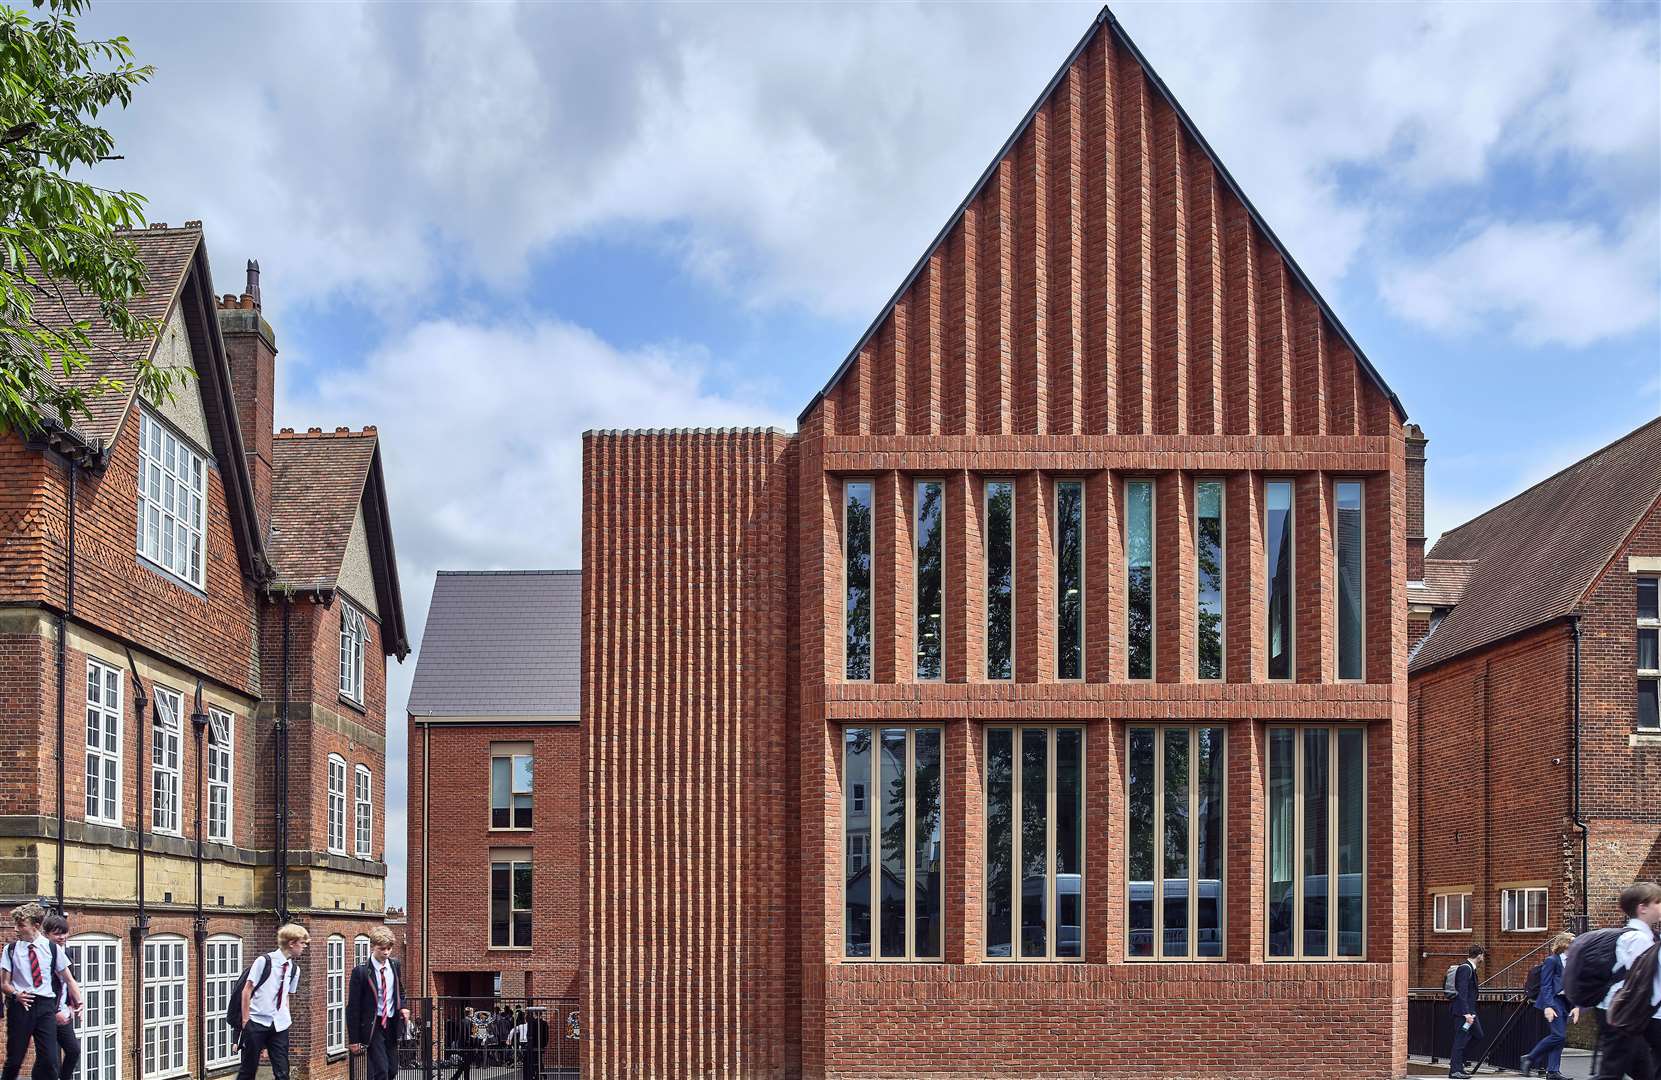 The Mitchell Building at the Skinners' School in Tunbridge Wells, designed by Bell Phillips Architects. Picture: Kilian O'Sullivan